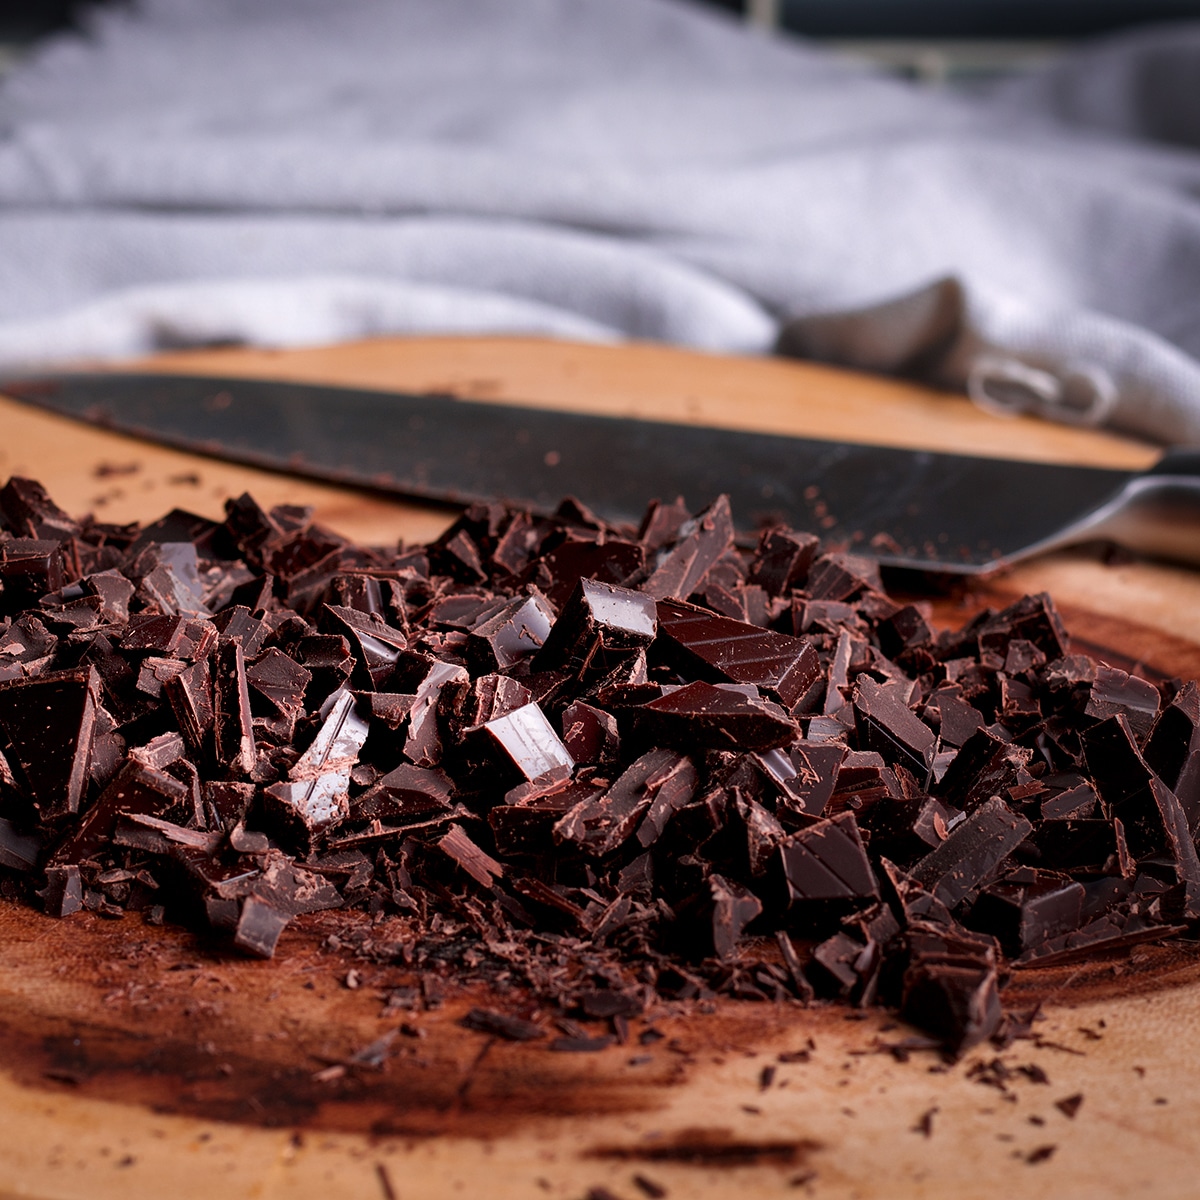 A pile of chopped chocolate on a cutting board with a knife resting next to it.